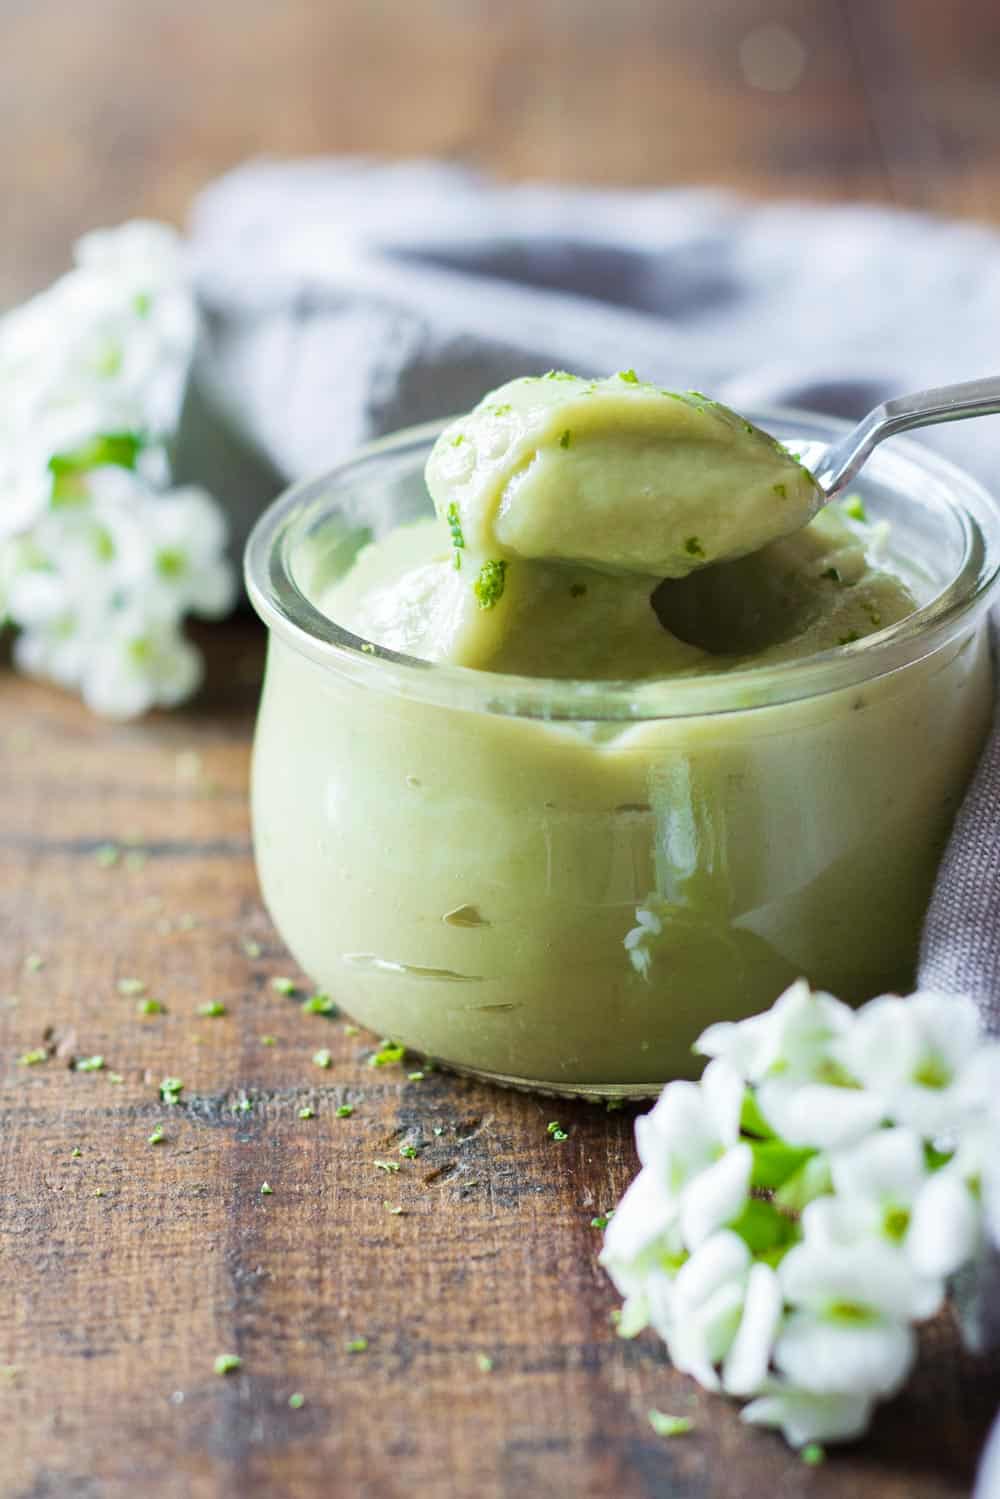 Spoonful of key lime pudding being grabbed from a glass jar. 